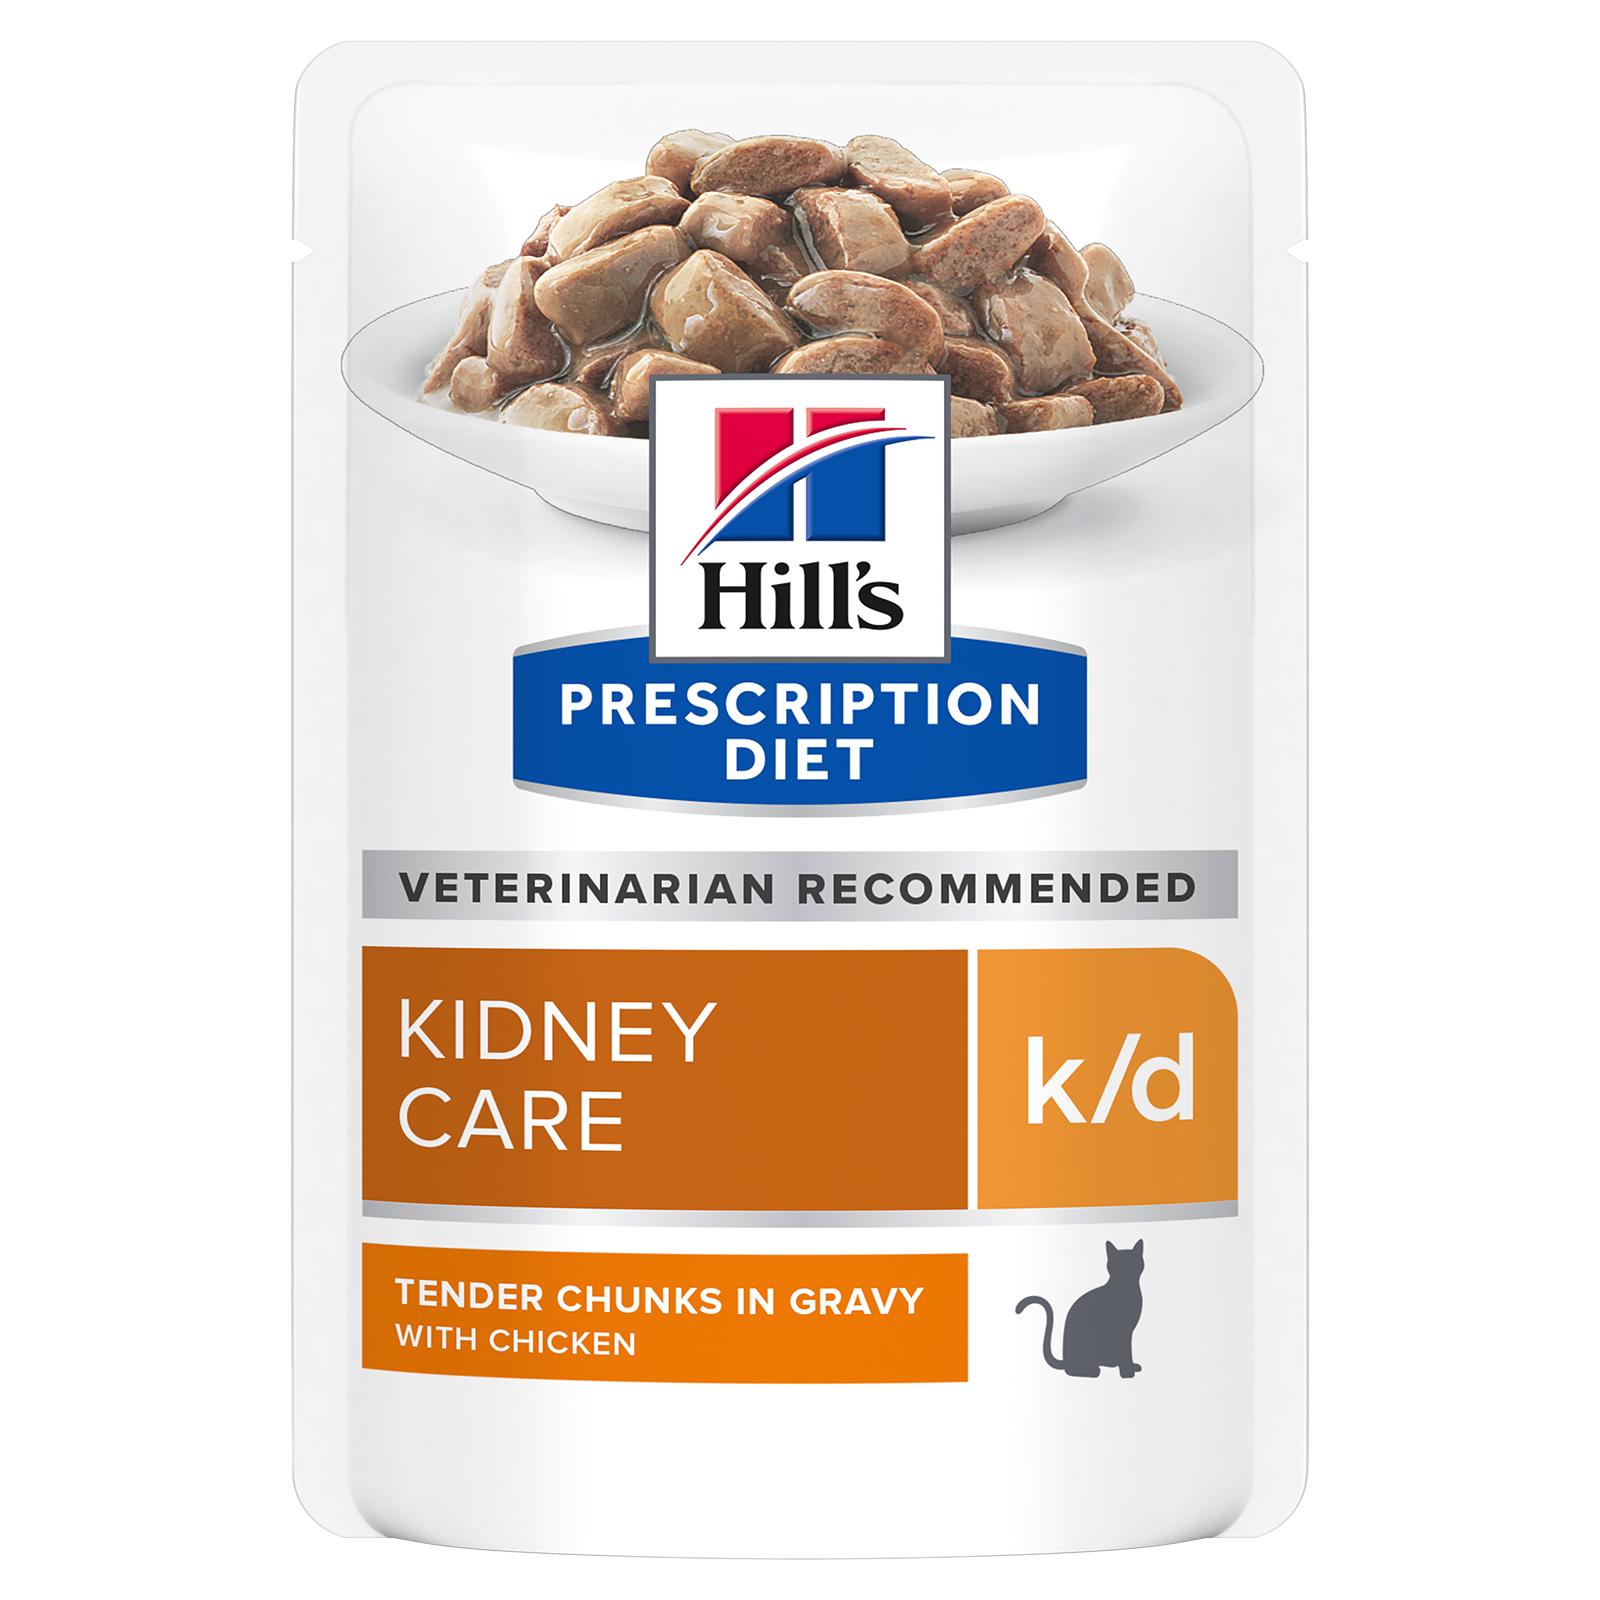 Hill's Prescription Diet Cat Food Pouch k/d Kidney Care with Chicken